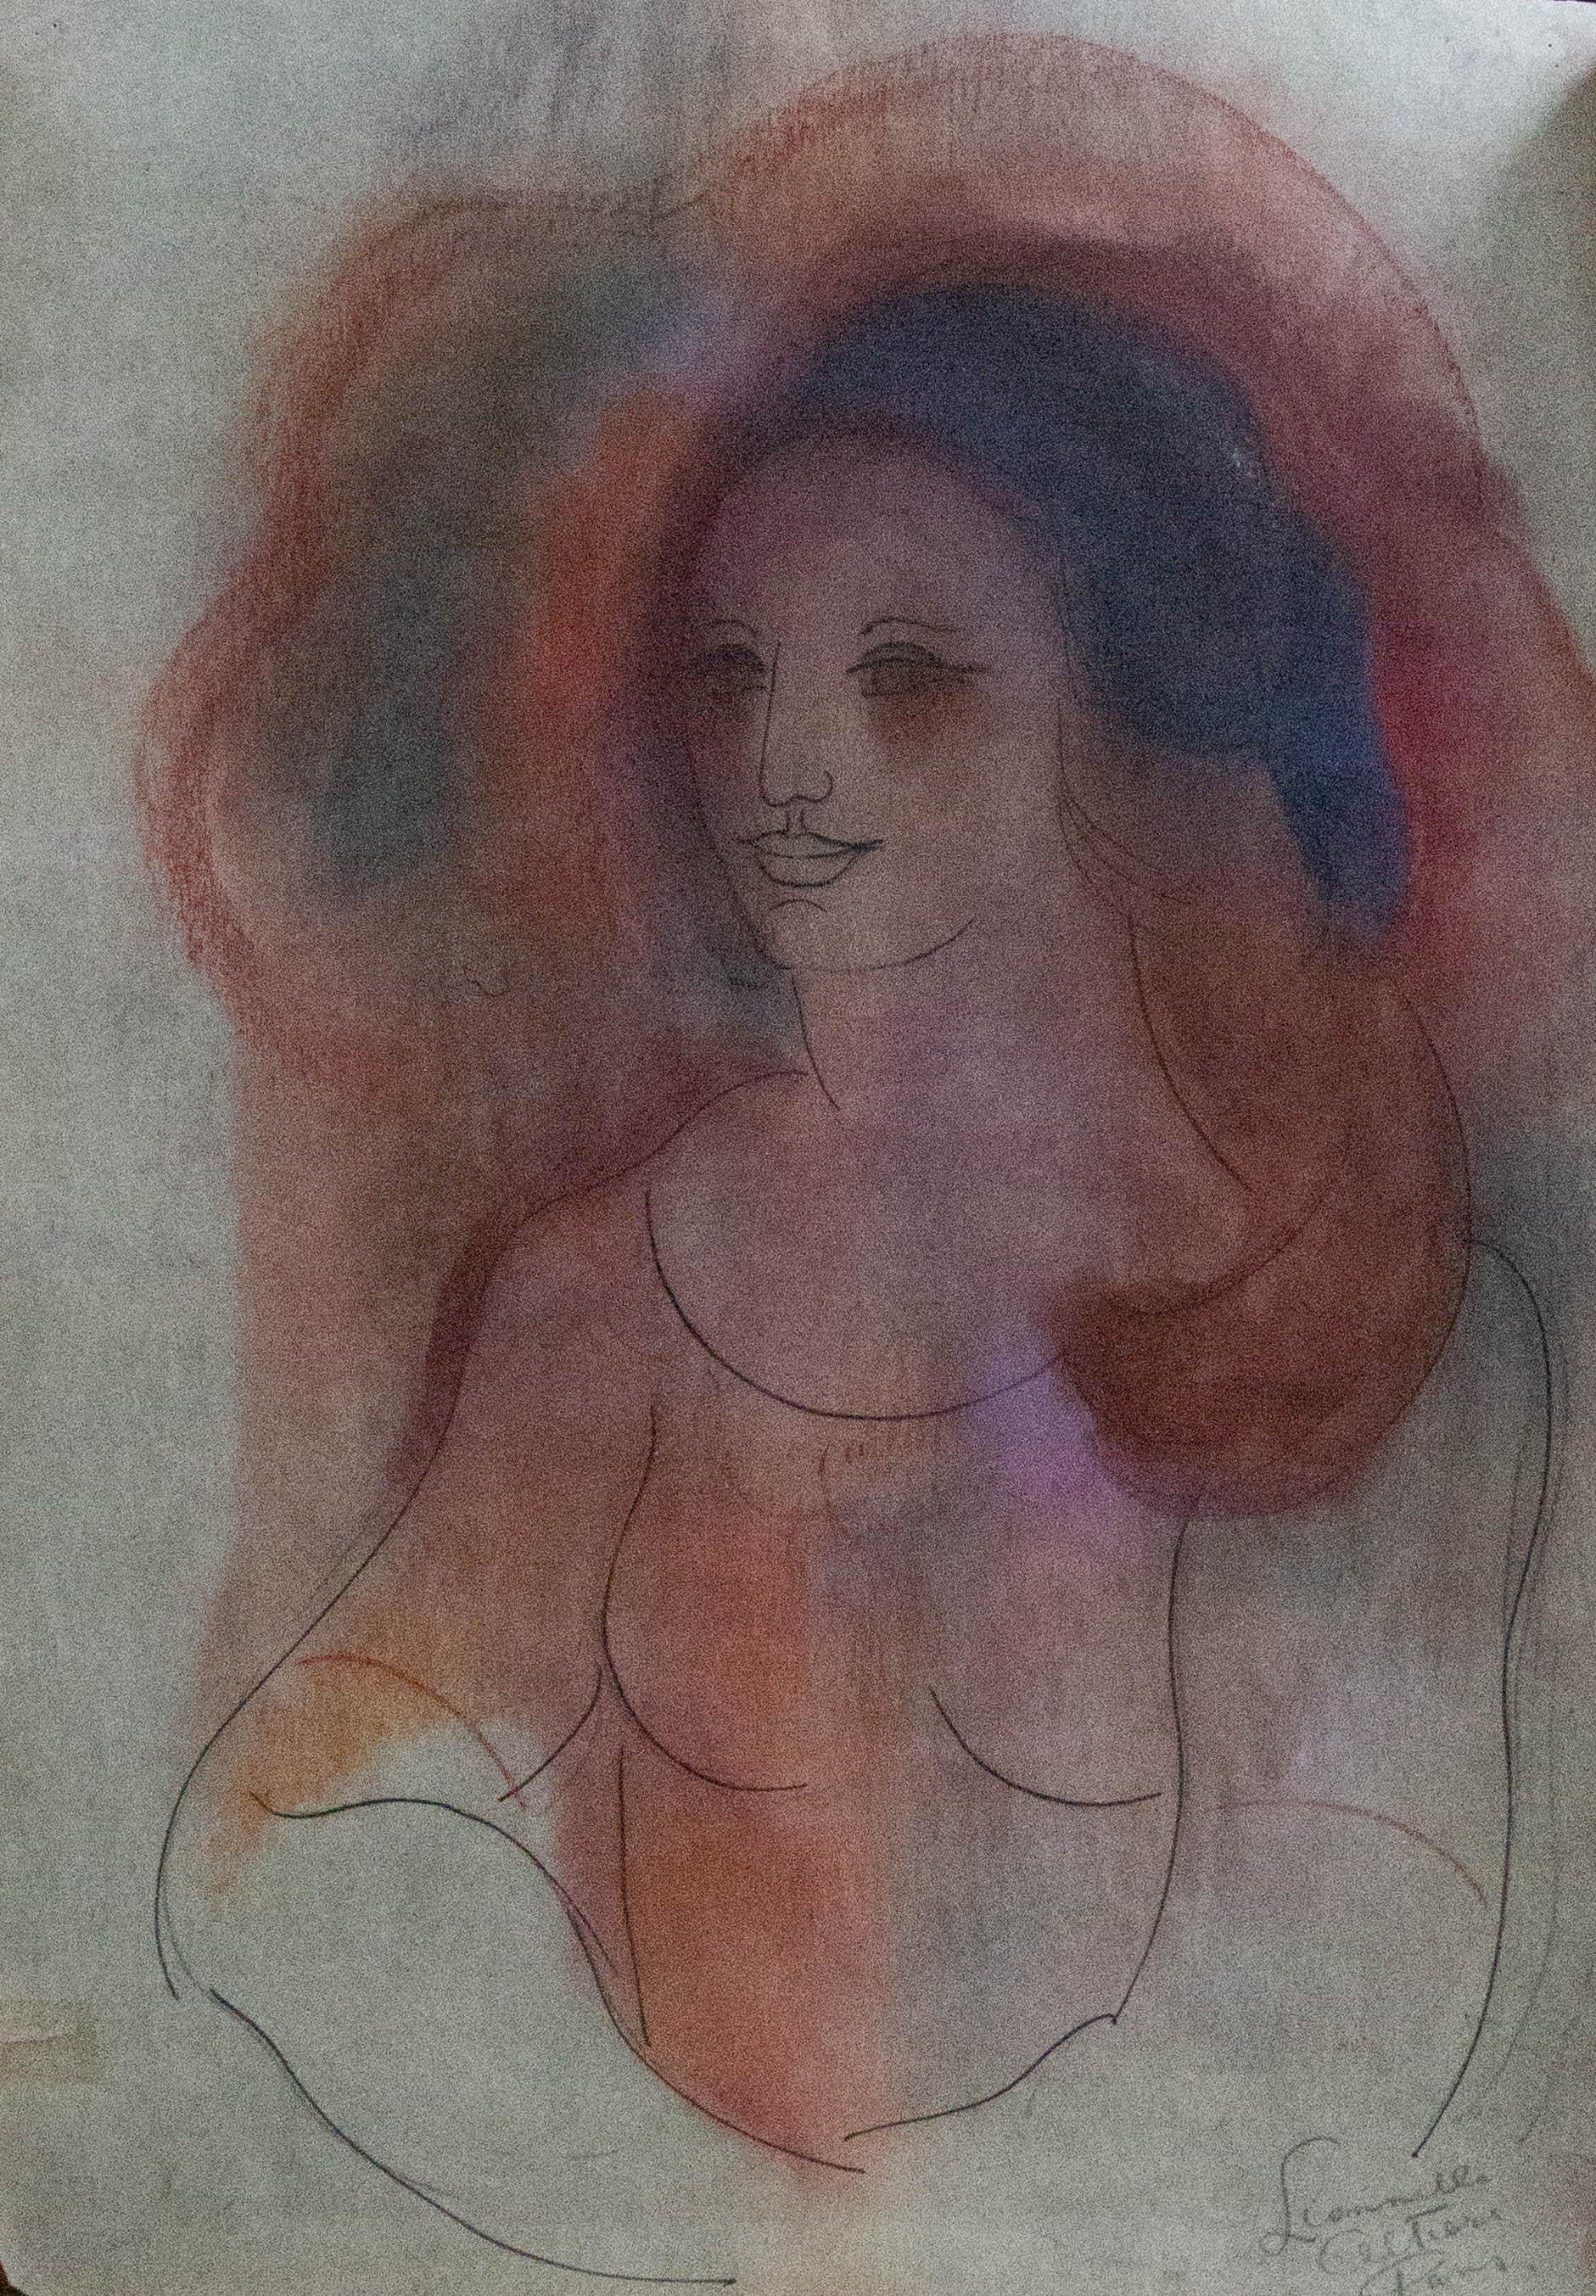 An ethereal portrait of a mysterious woman with a gentle smile in a mix of pastel, pen and ink and watercolour wash..She is swathed in reddish hues. The artist has inscribed (possibly the sitter's name and location) to the lower right. On vellum.
